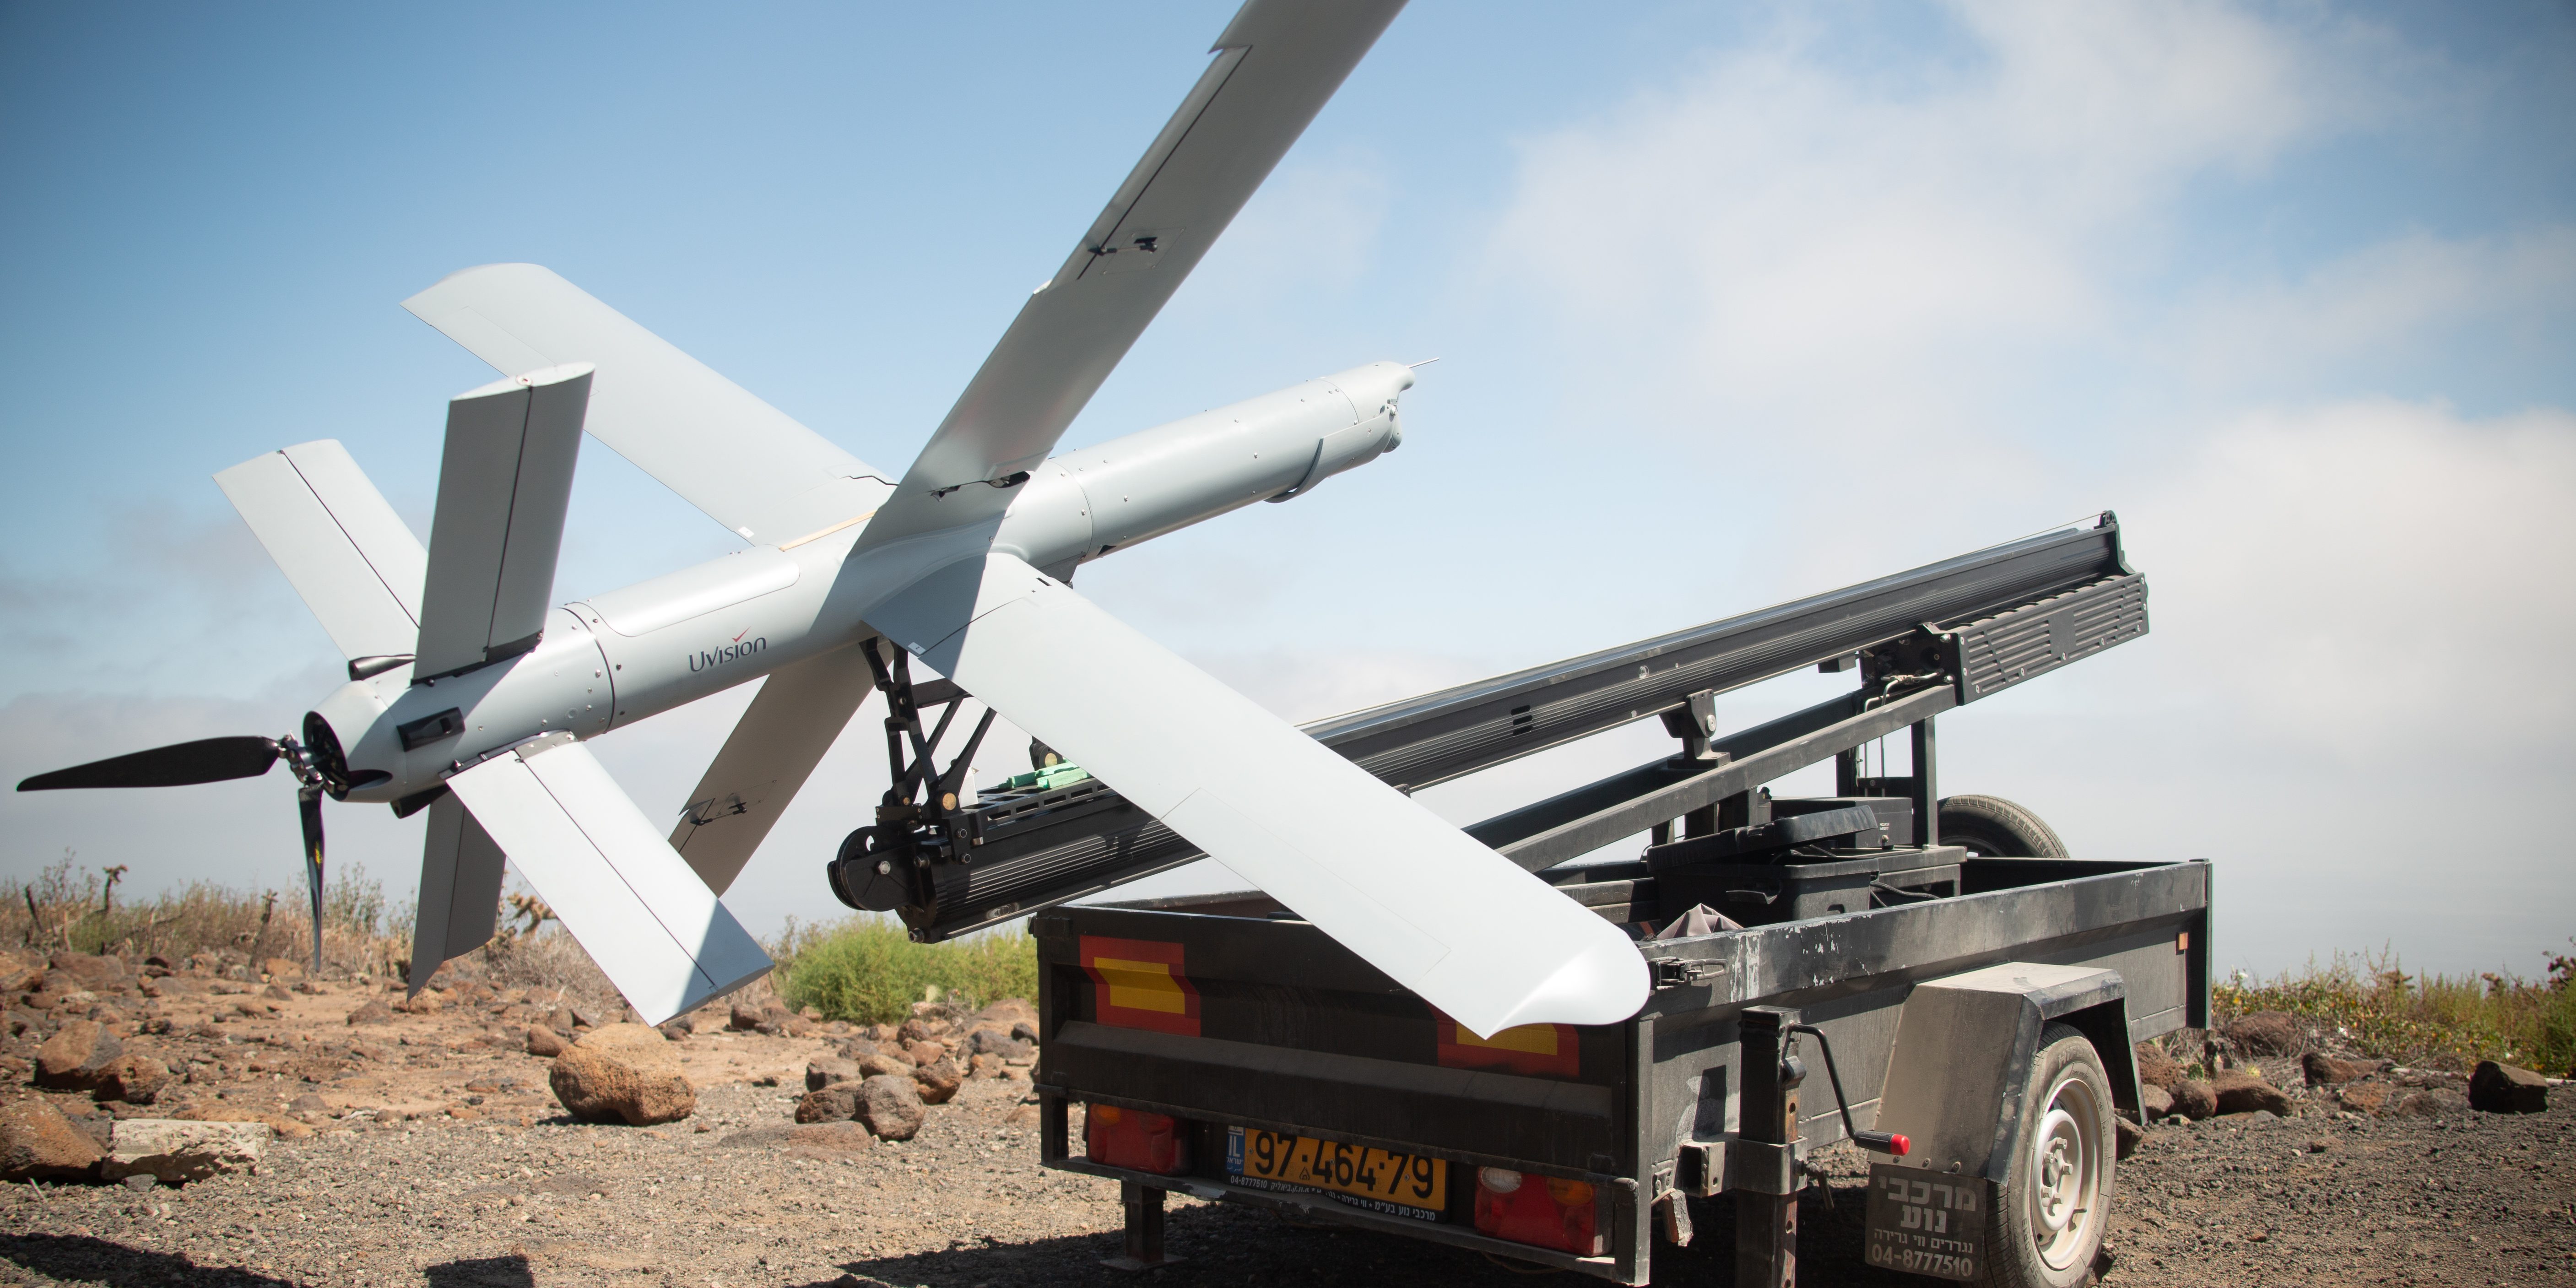 A U.S. Marine Corps Hero-400 loitering munition drone is staged before flight on San Clemente Island, California, May 25, 2022.